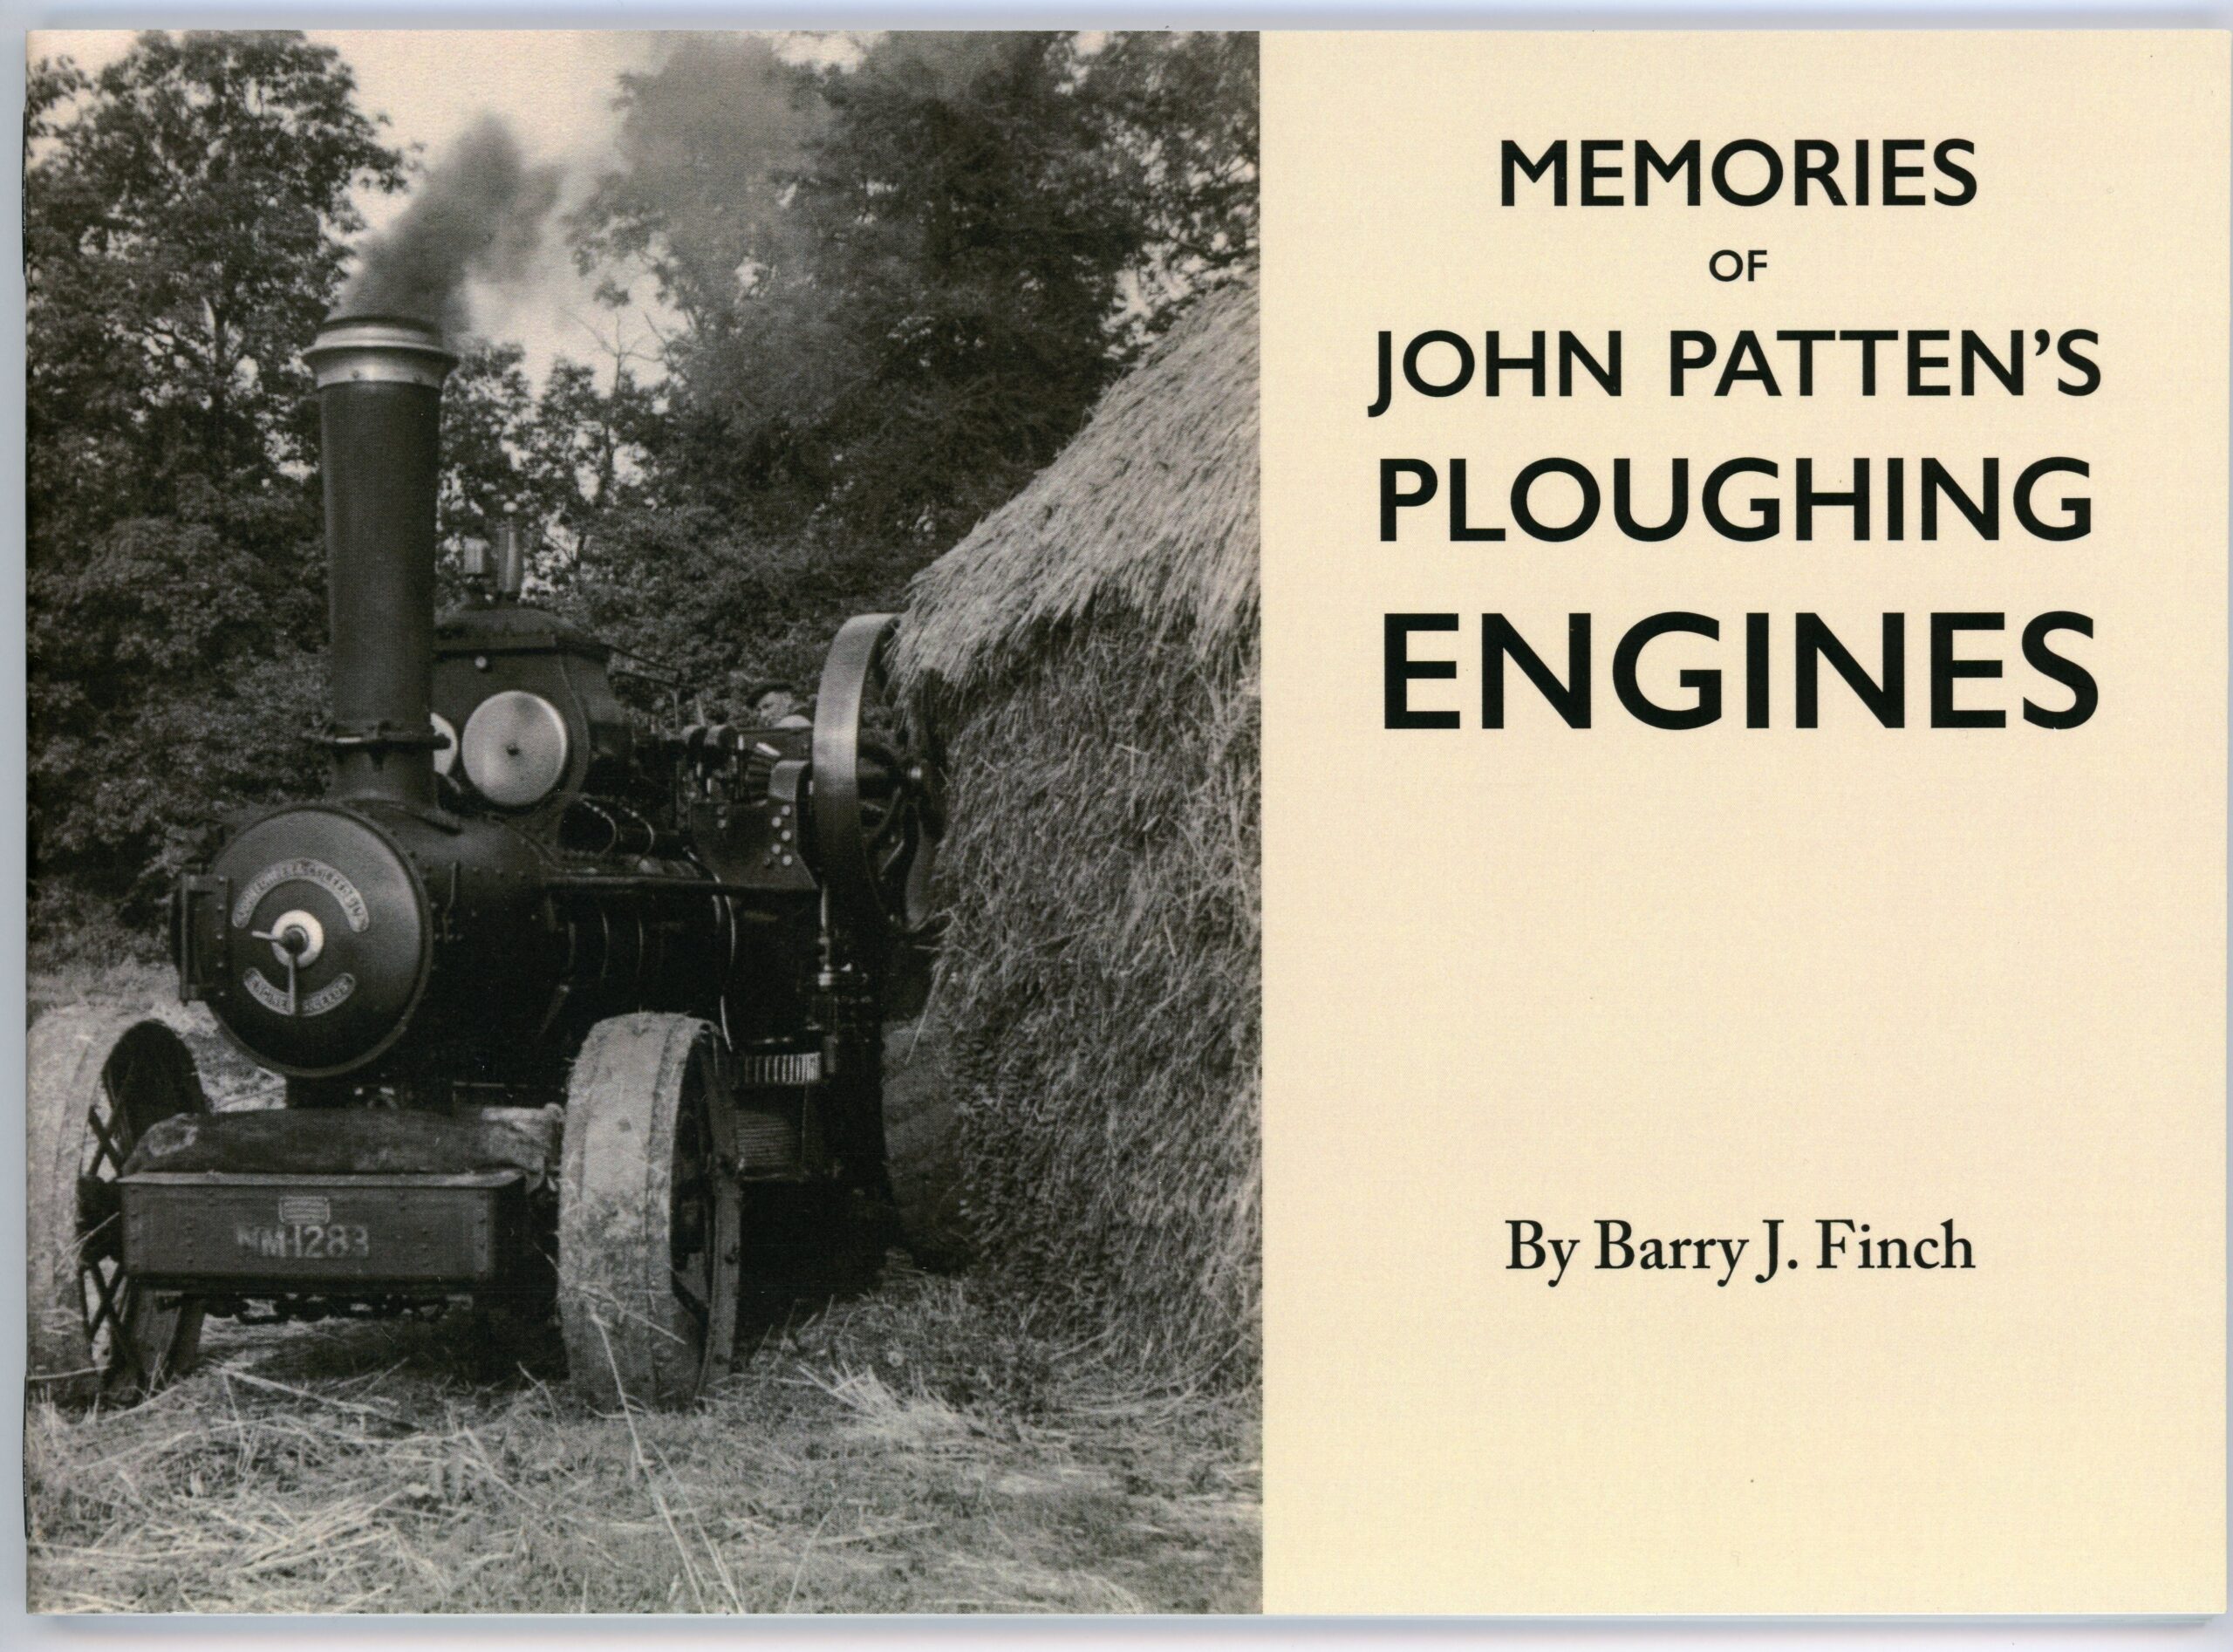 MEMORIES OF JOHN PATTEN’S PLOUGHING ENGINES BY BARRY J. FINCH